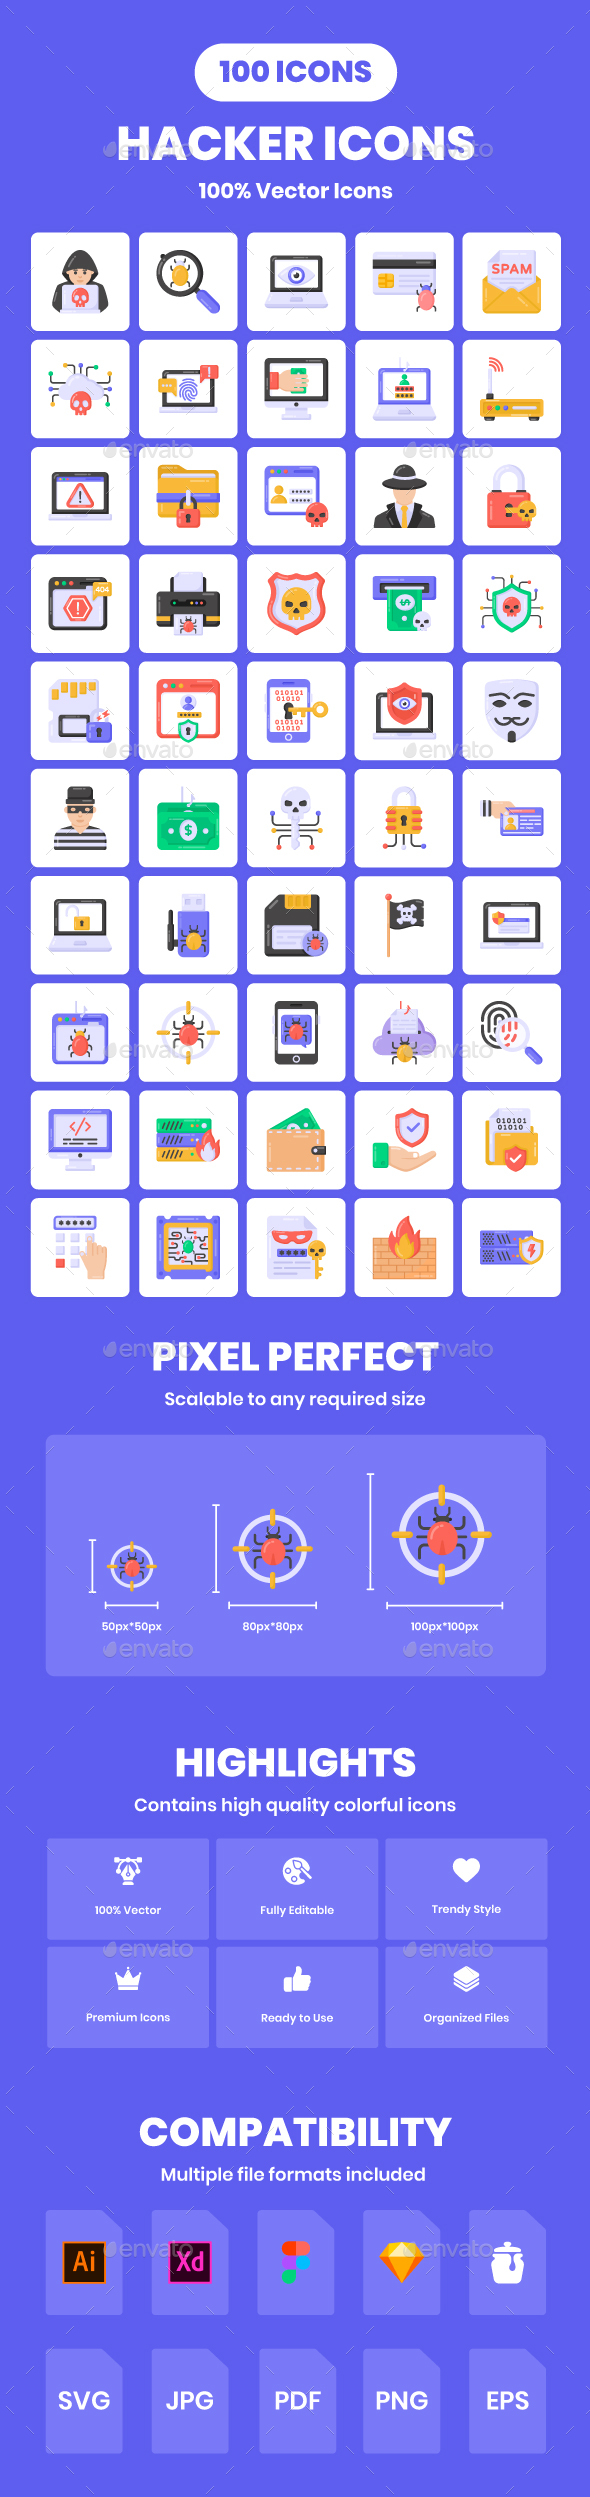 100 Flat Hacking Vector Icons